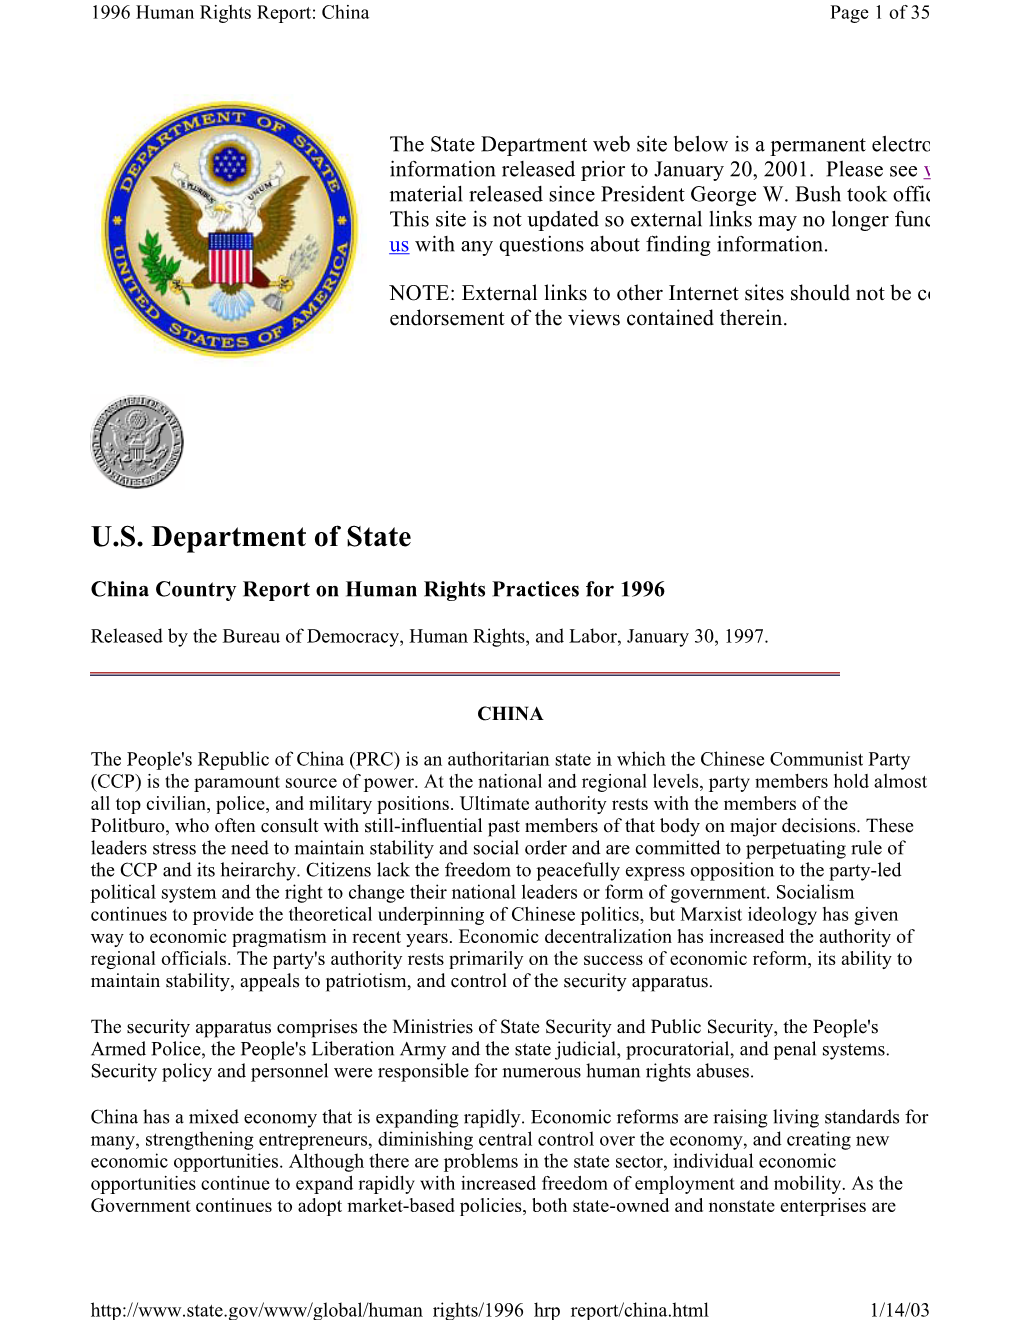 U.S. Department of State China Country Report on Human Rights